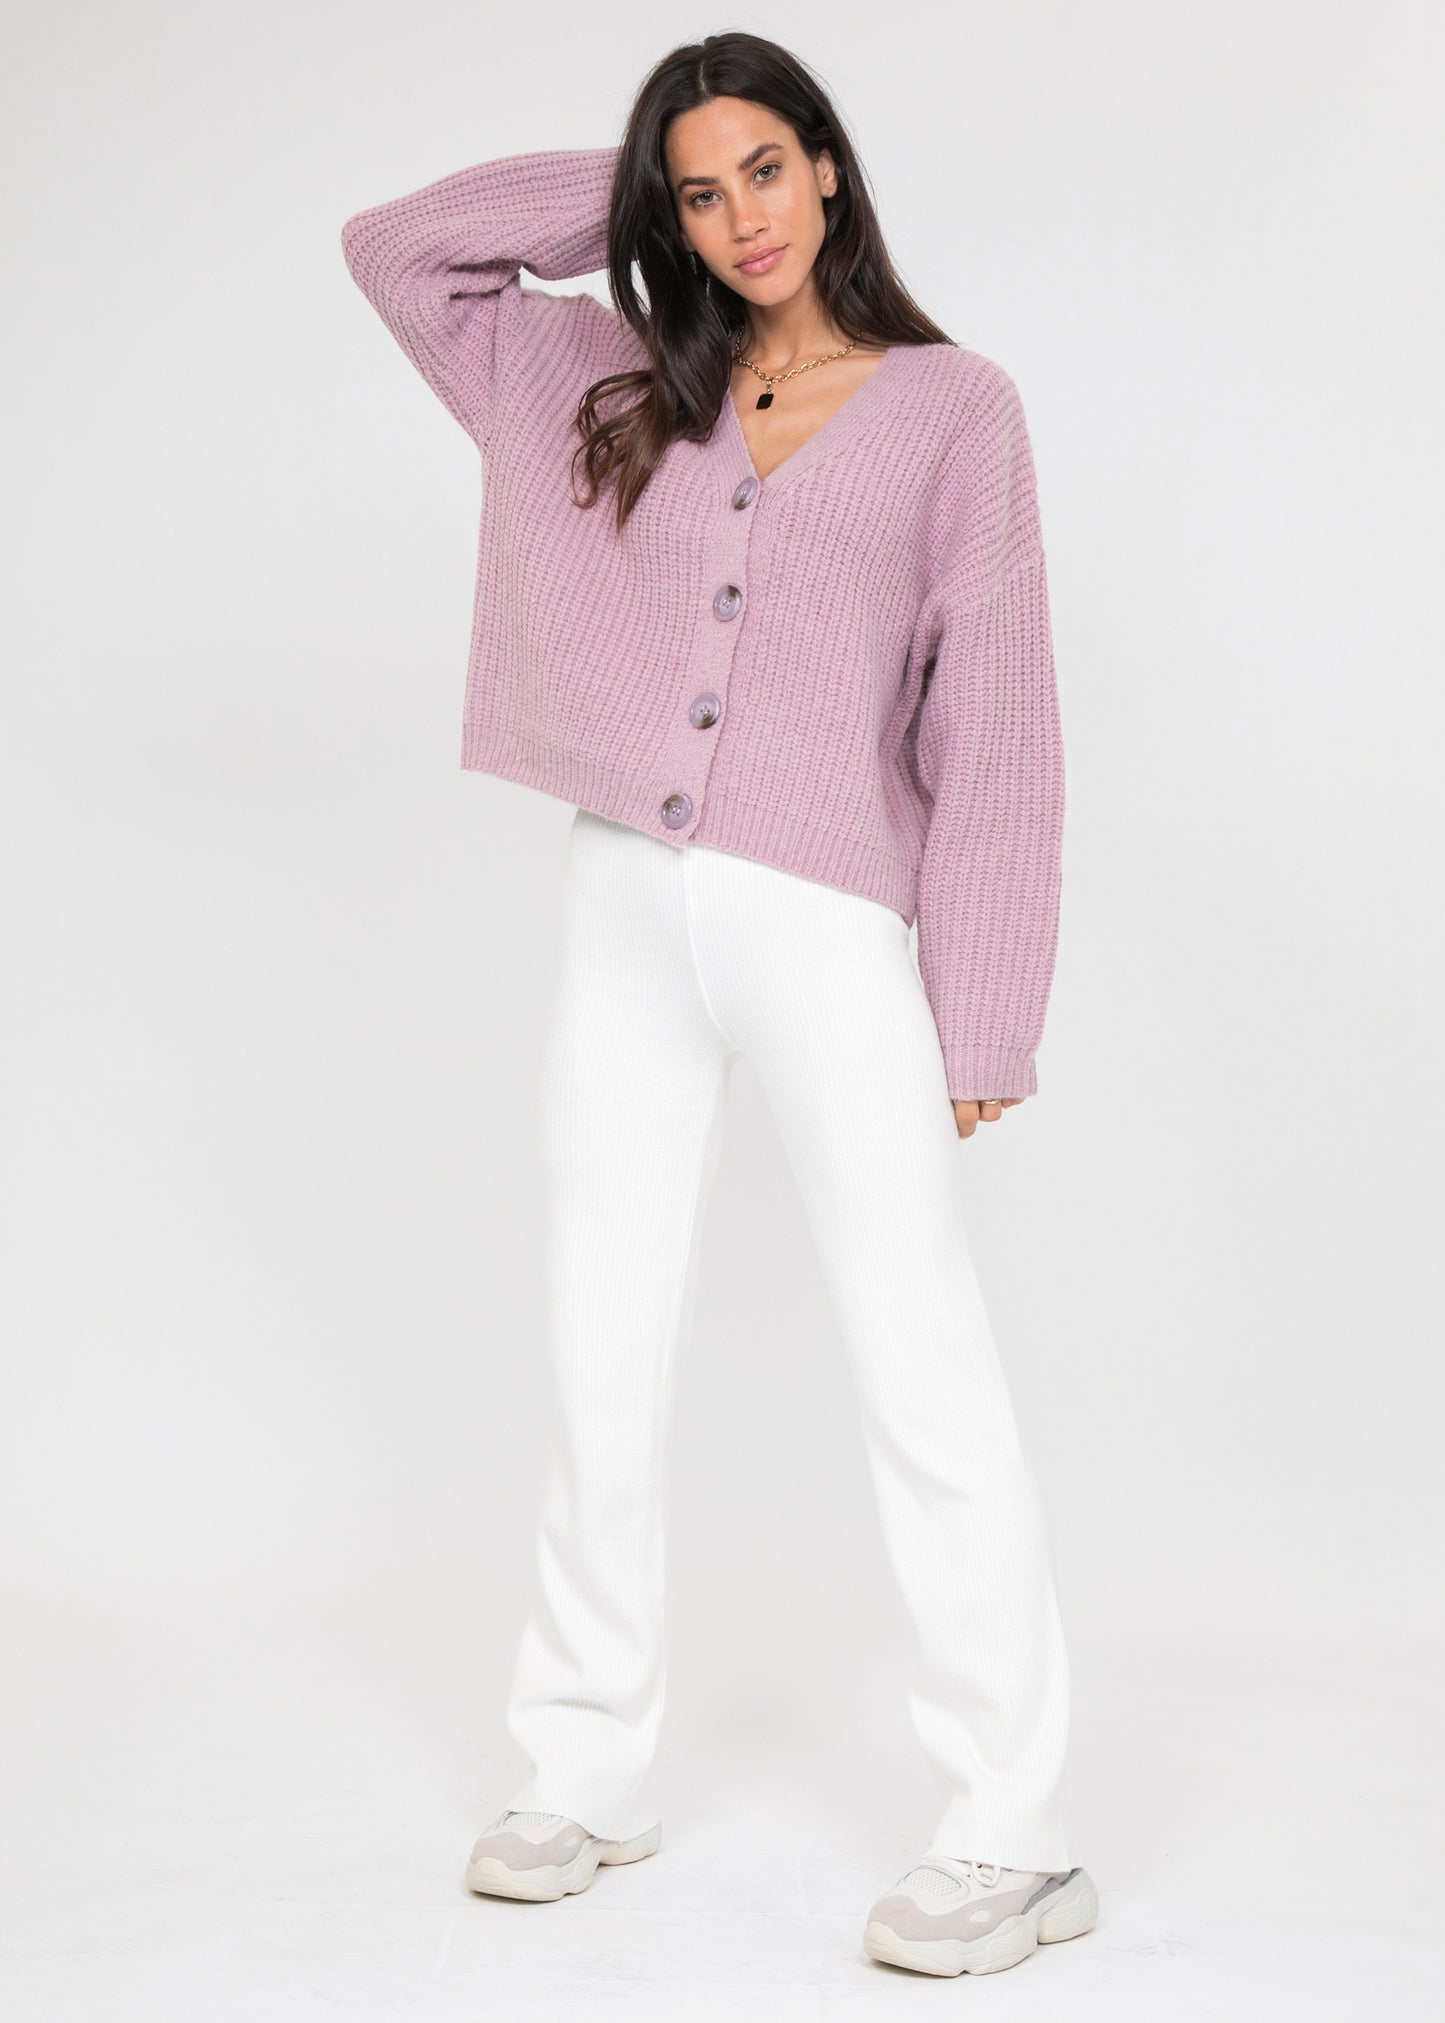 Lavender knit cardigan with buttons